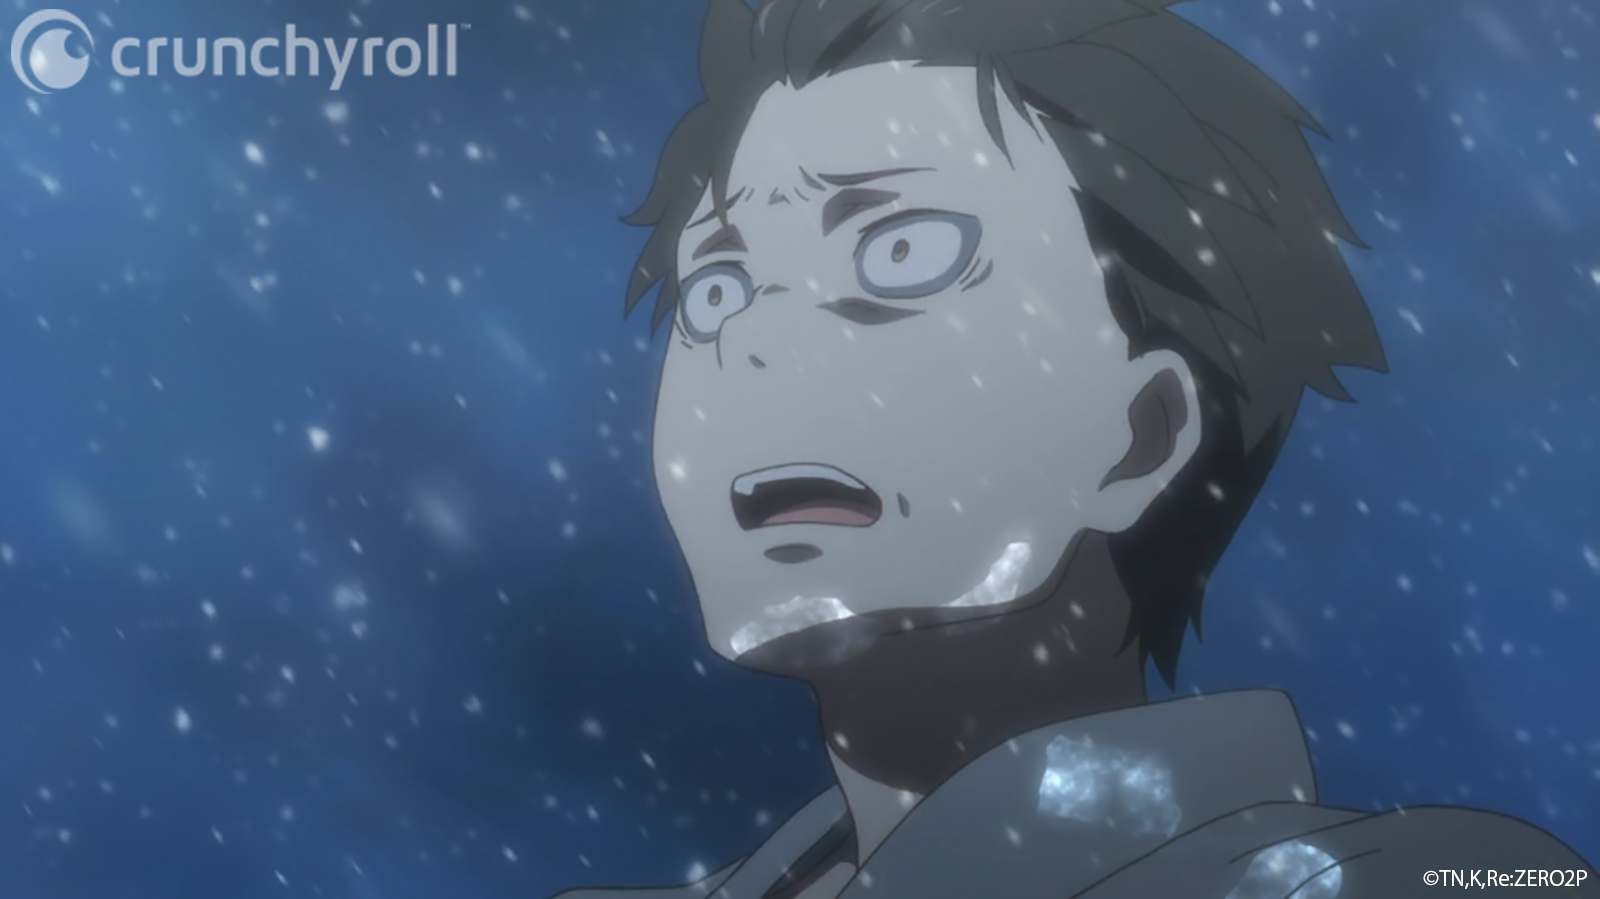 Natsuki Subaru begins to freeze solid beneath the icy wrath of Puck in a scene from the Re:ZERO -Starting Life in Another World- TV anime.